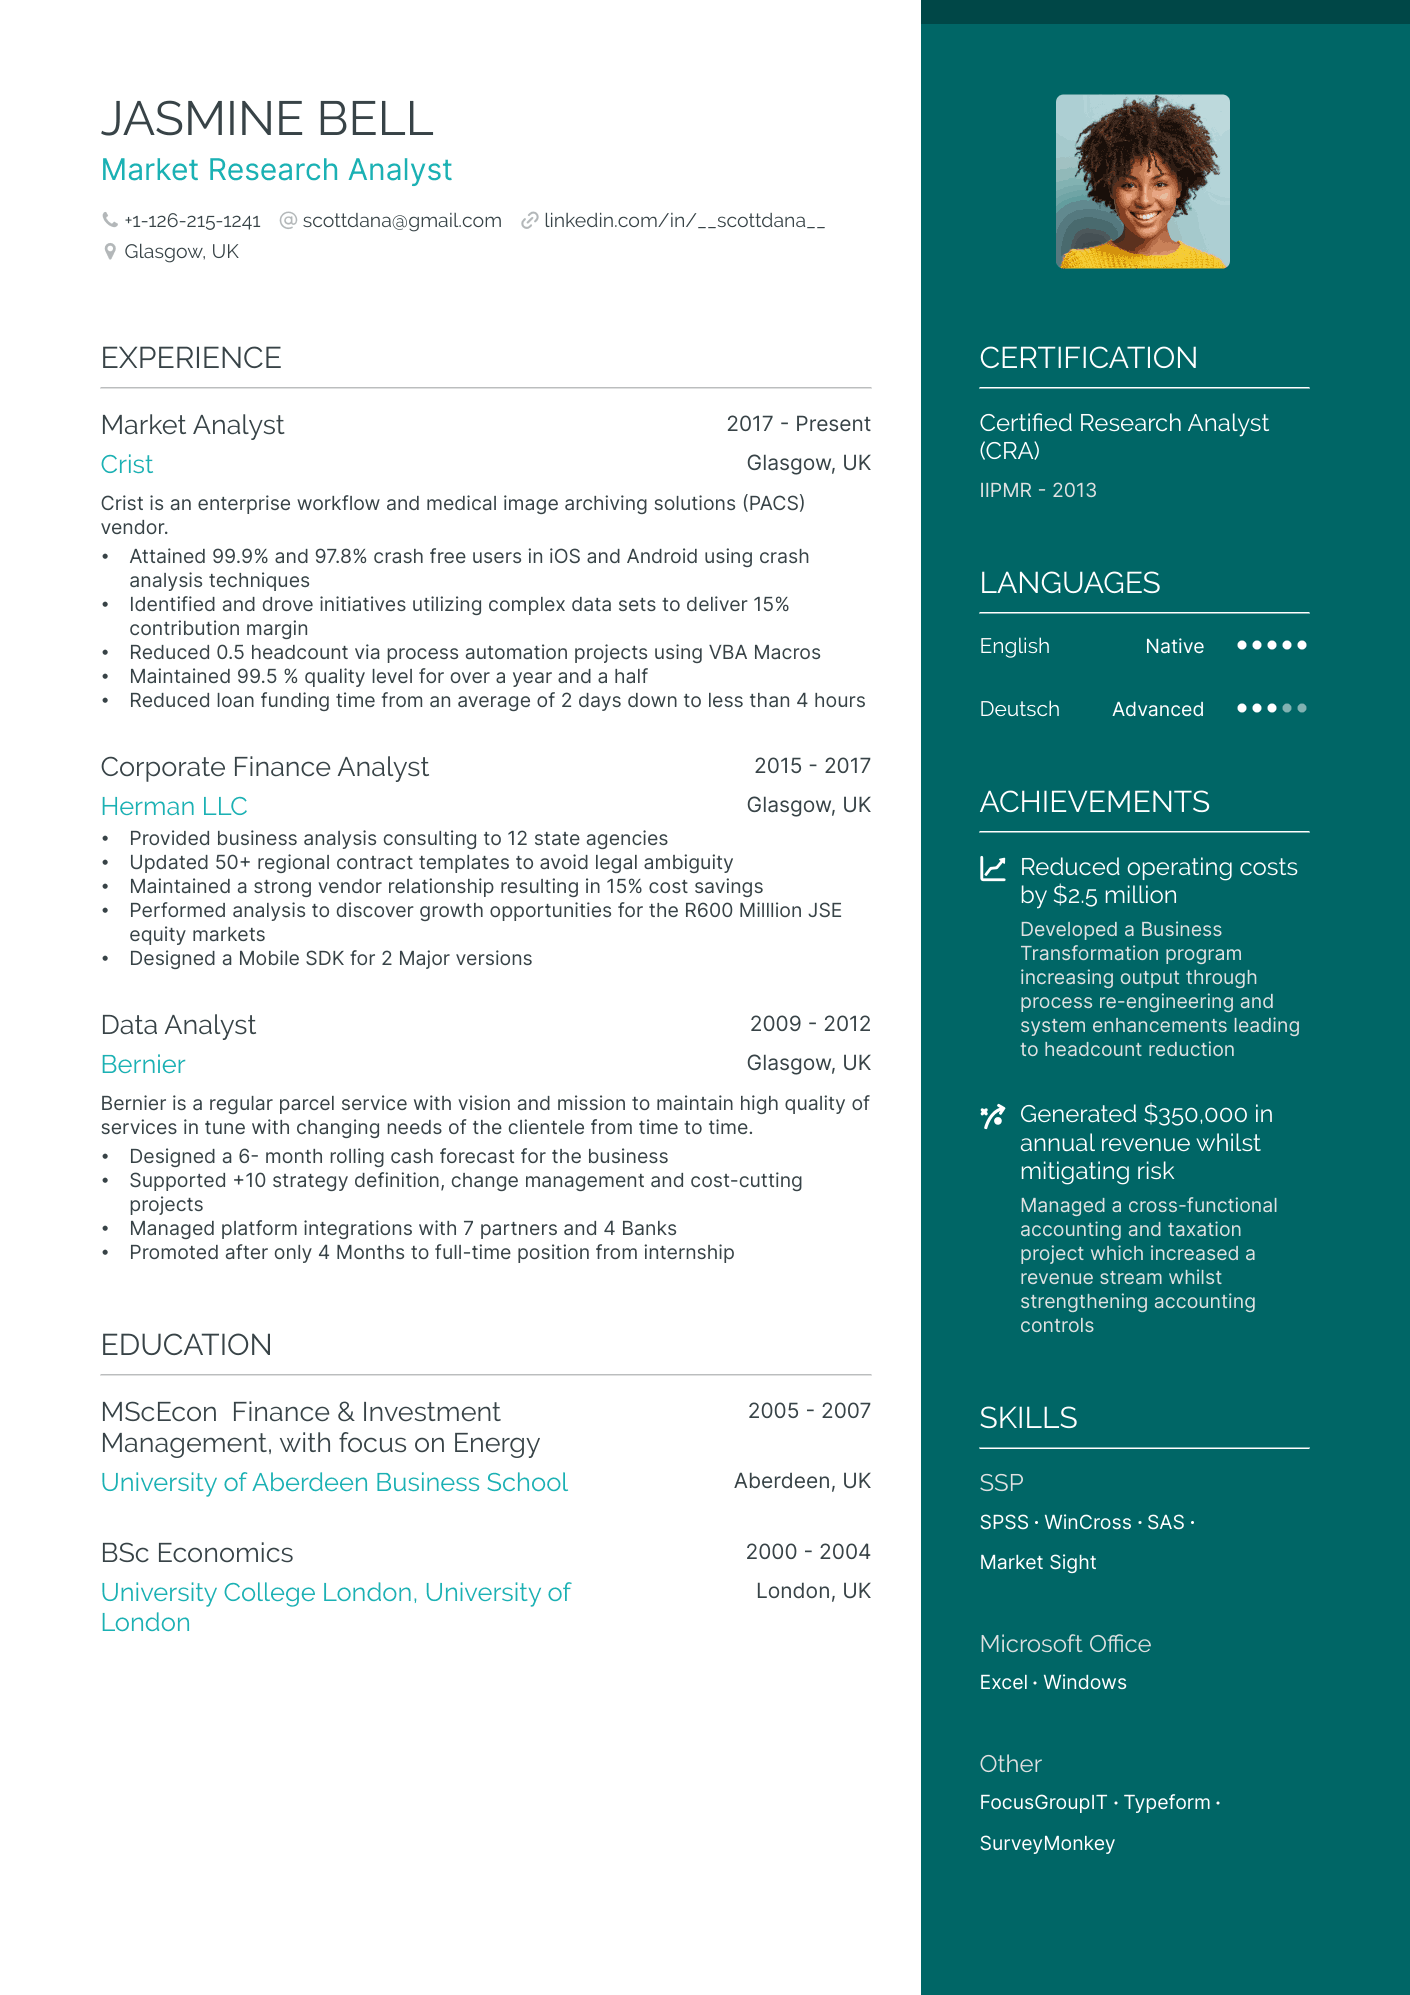 Market Research resume example